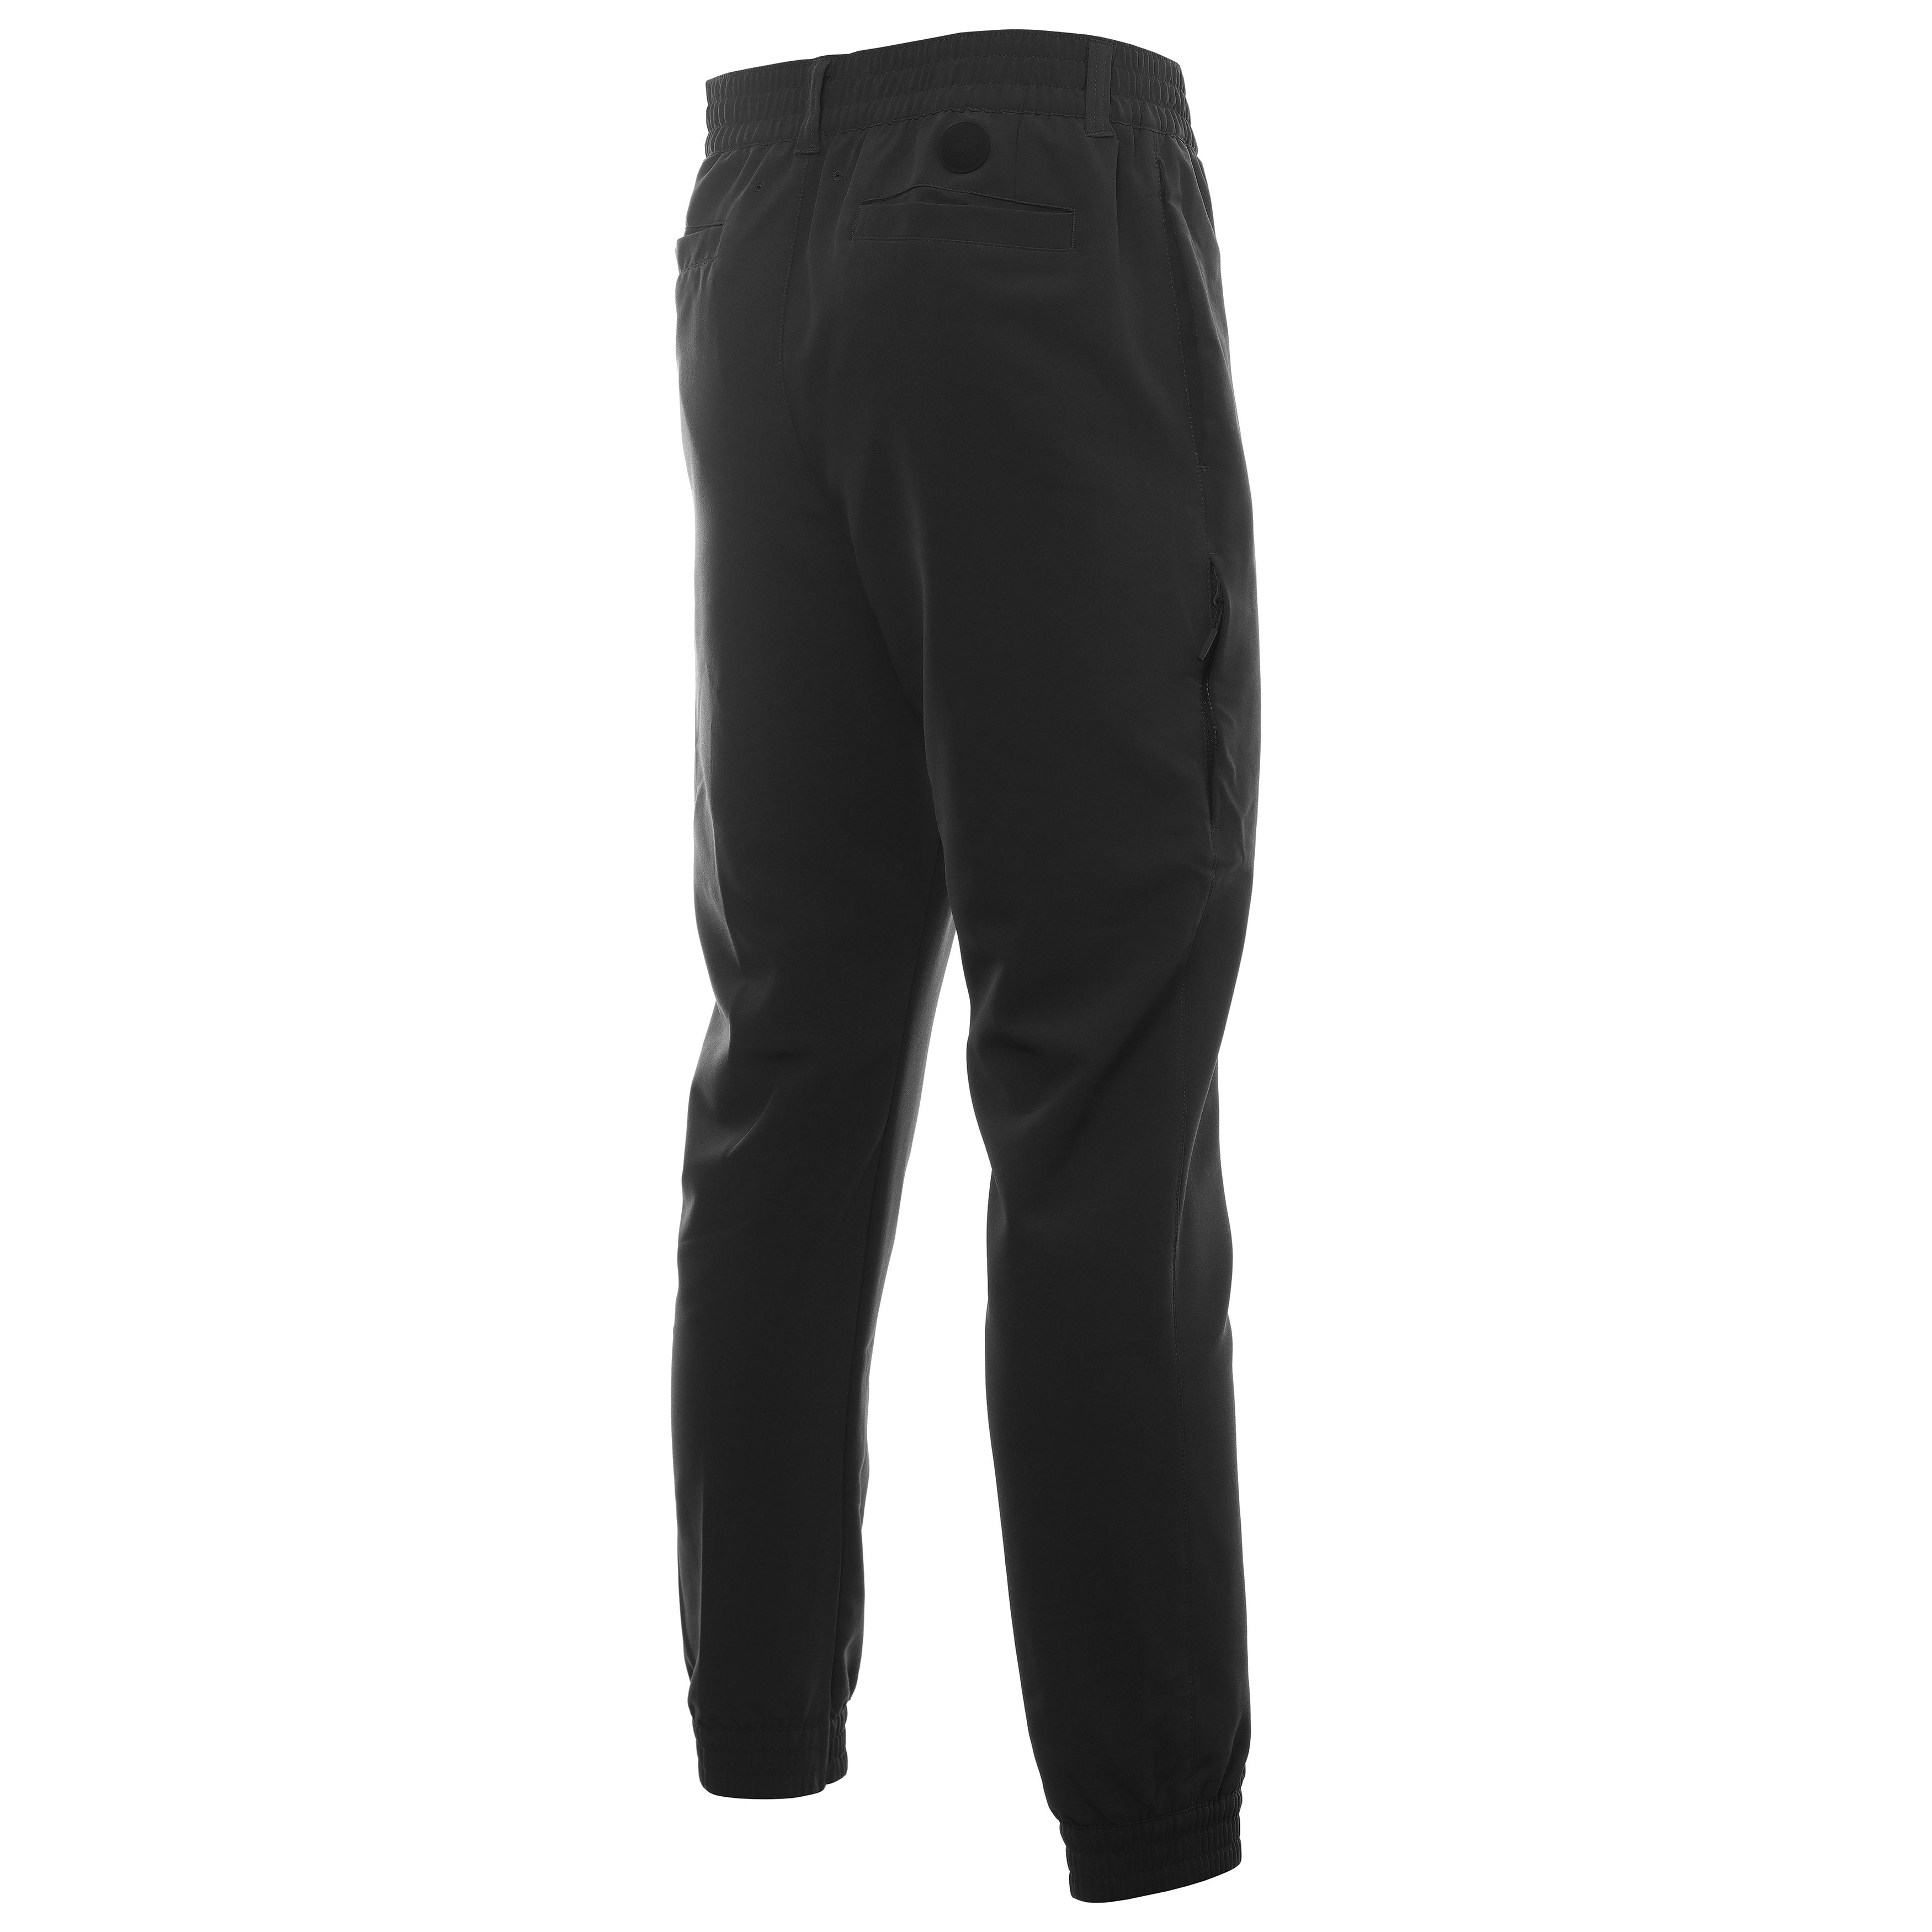 Nike Golf Joggers - Unscripted Cuffed Pant Style